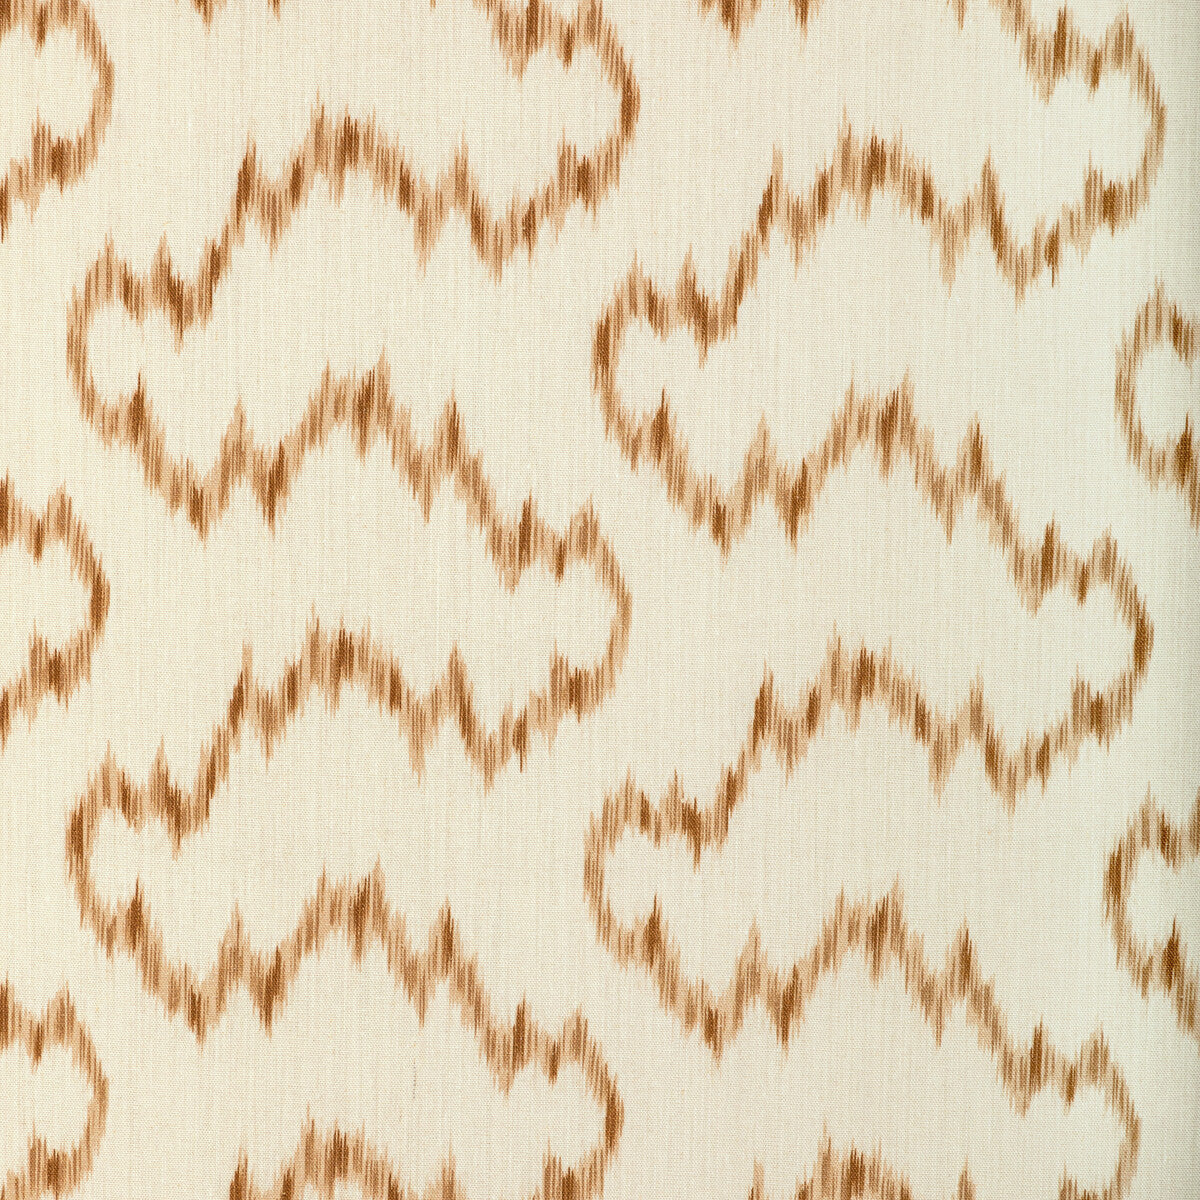 Mallorcan Ikat fabric in camel color - pattern 2022104.6116.0 - by Lee Jofa in the Sarah Bartholomew collection